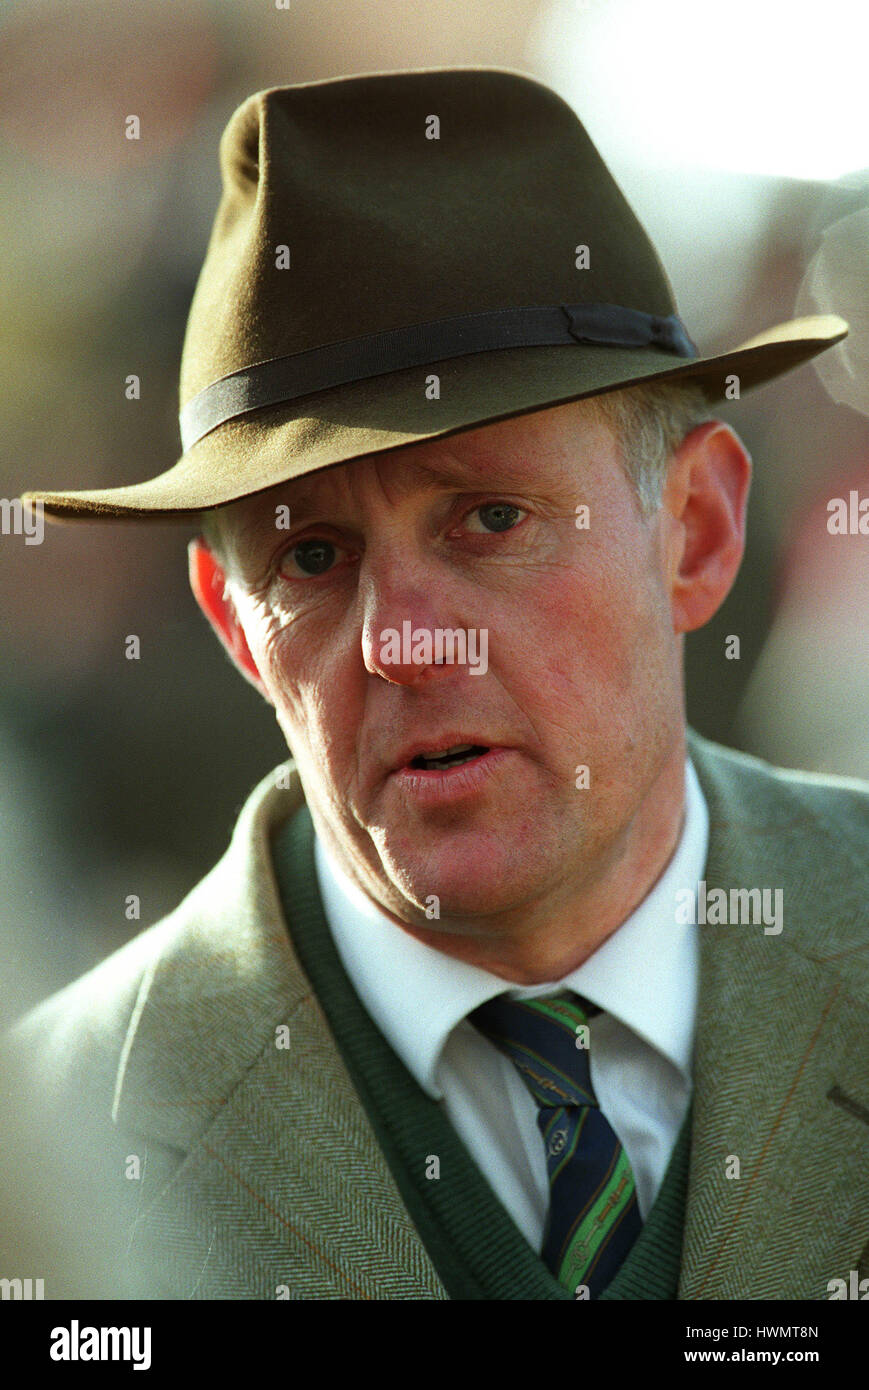 Philip Hobbs High Resolution Stock Photography and Images - Alamy